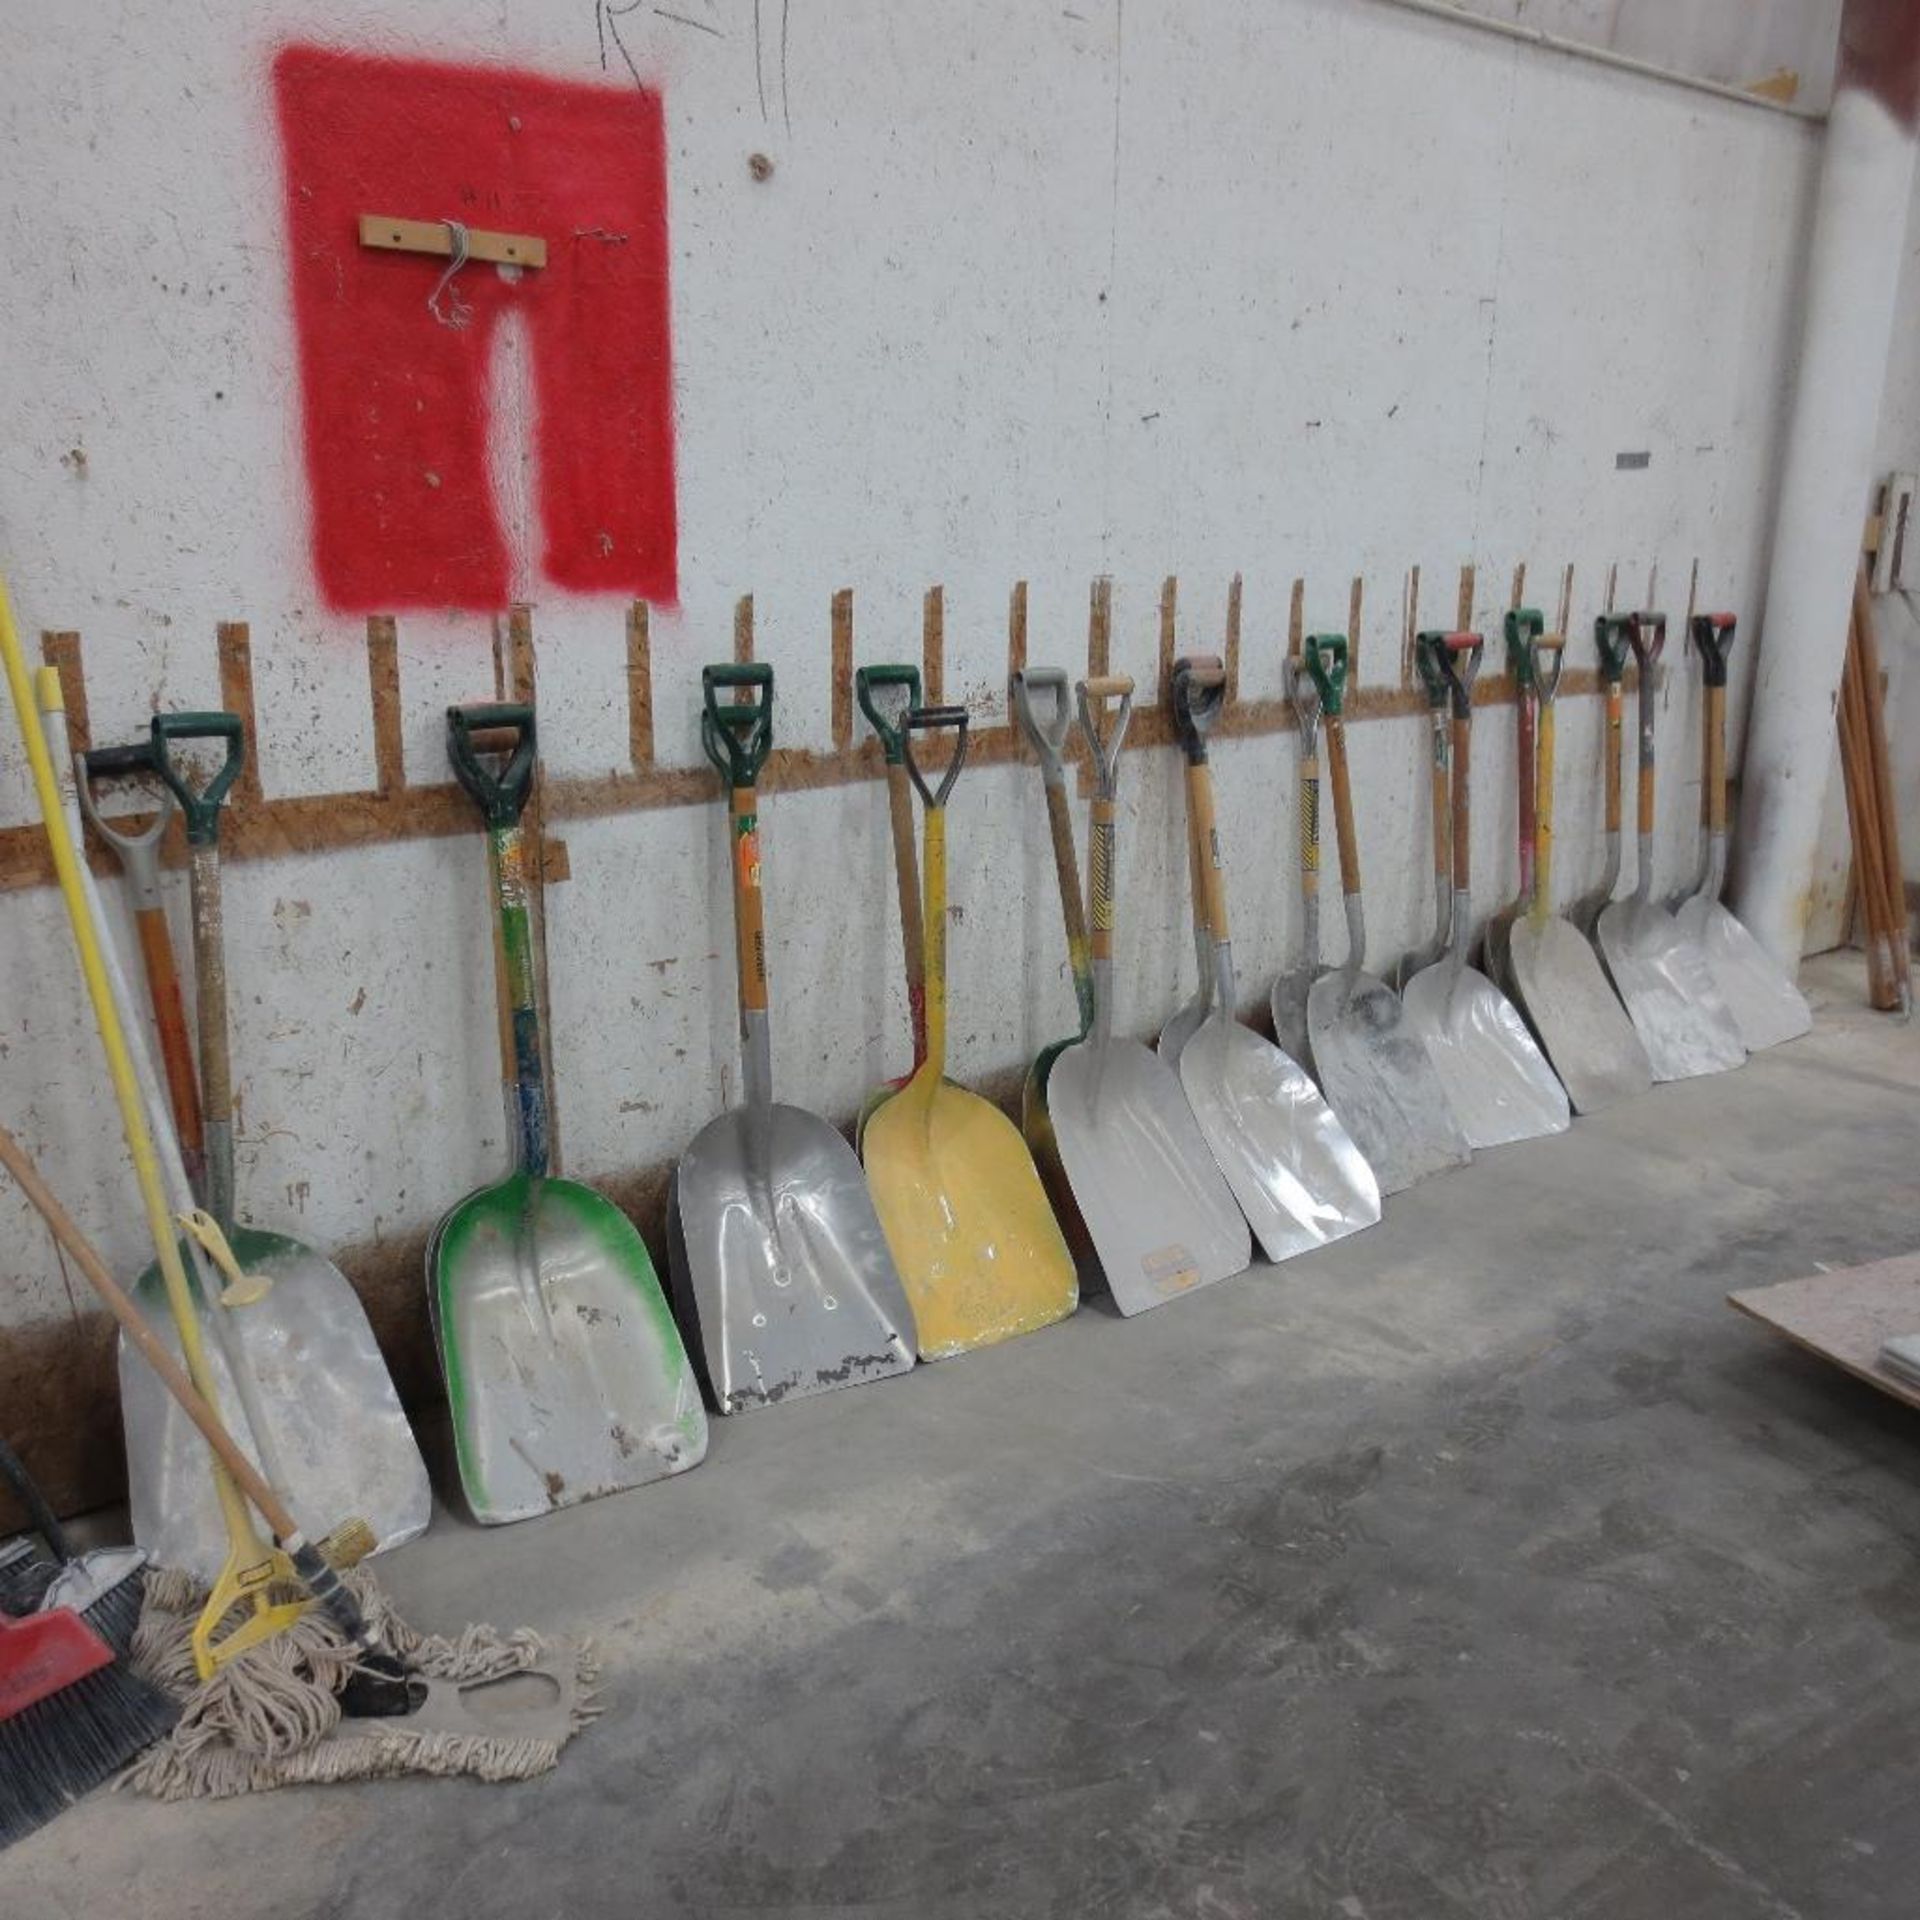 Brooms and Shovels - Image 2 of 2